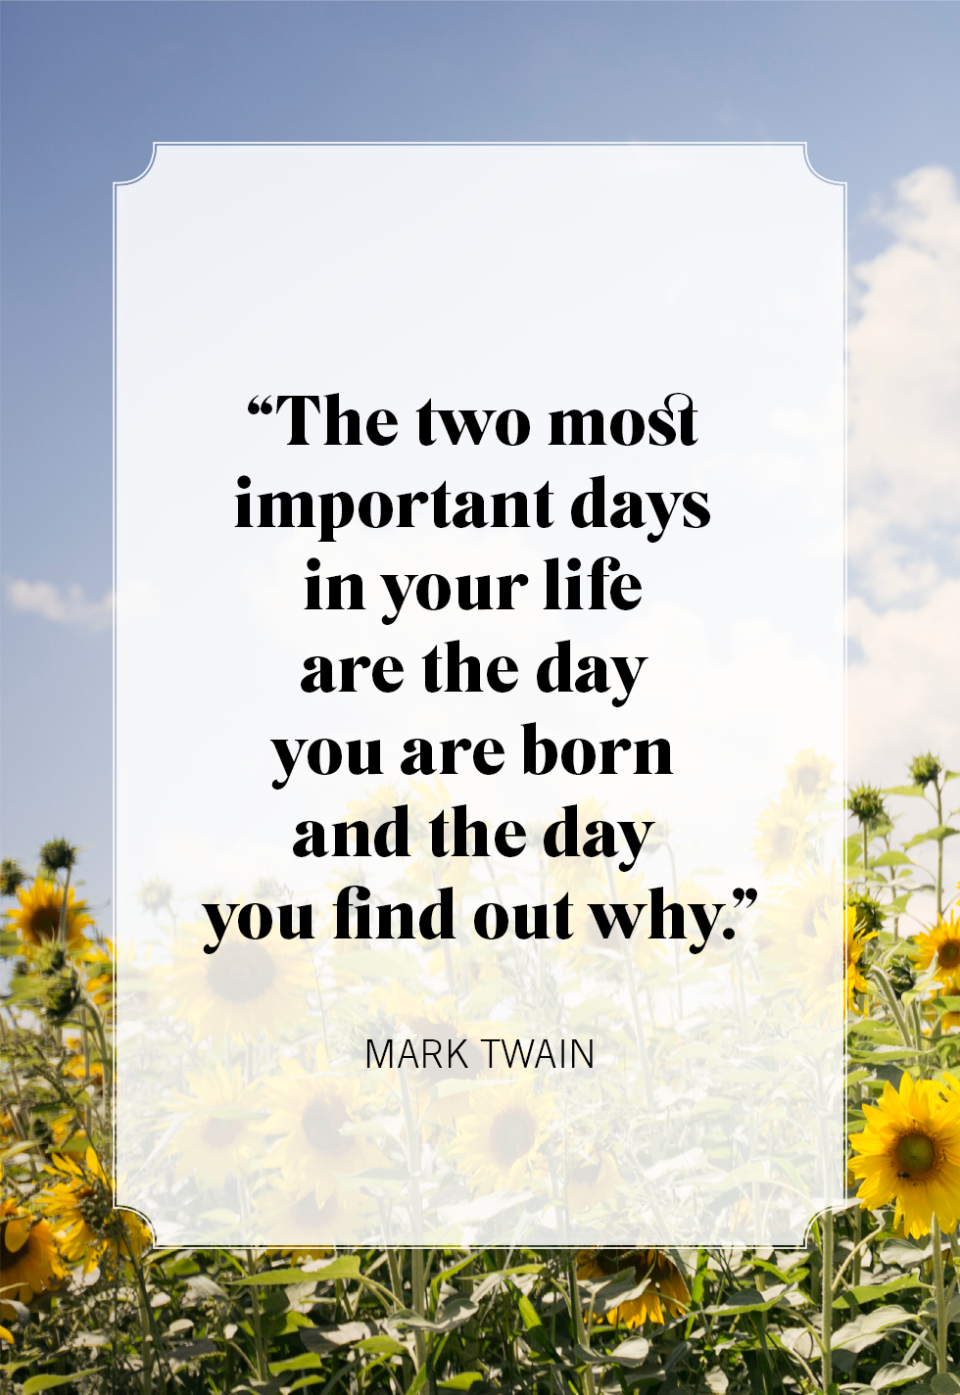 <p>“The two most important days in your life are the day you are born and the day you find out why.”</p>